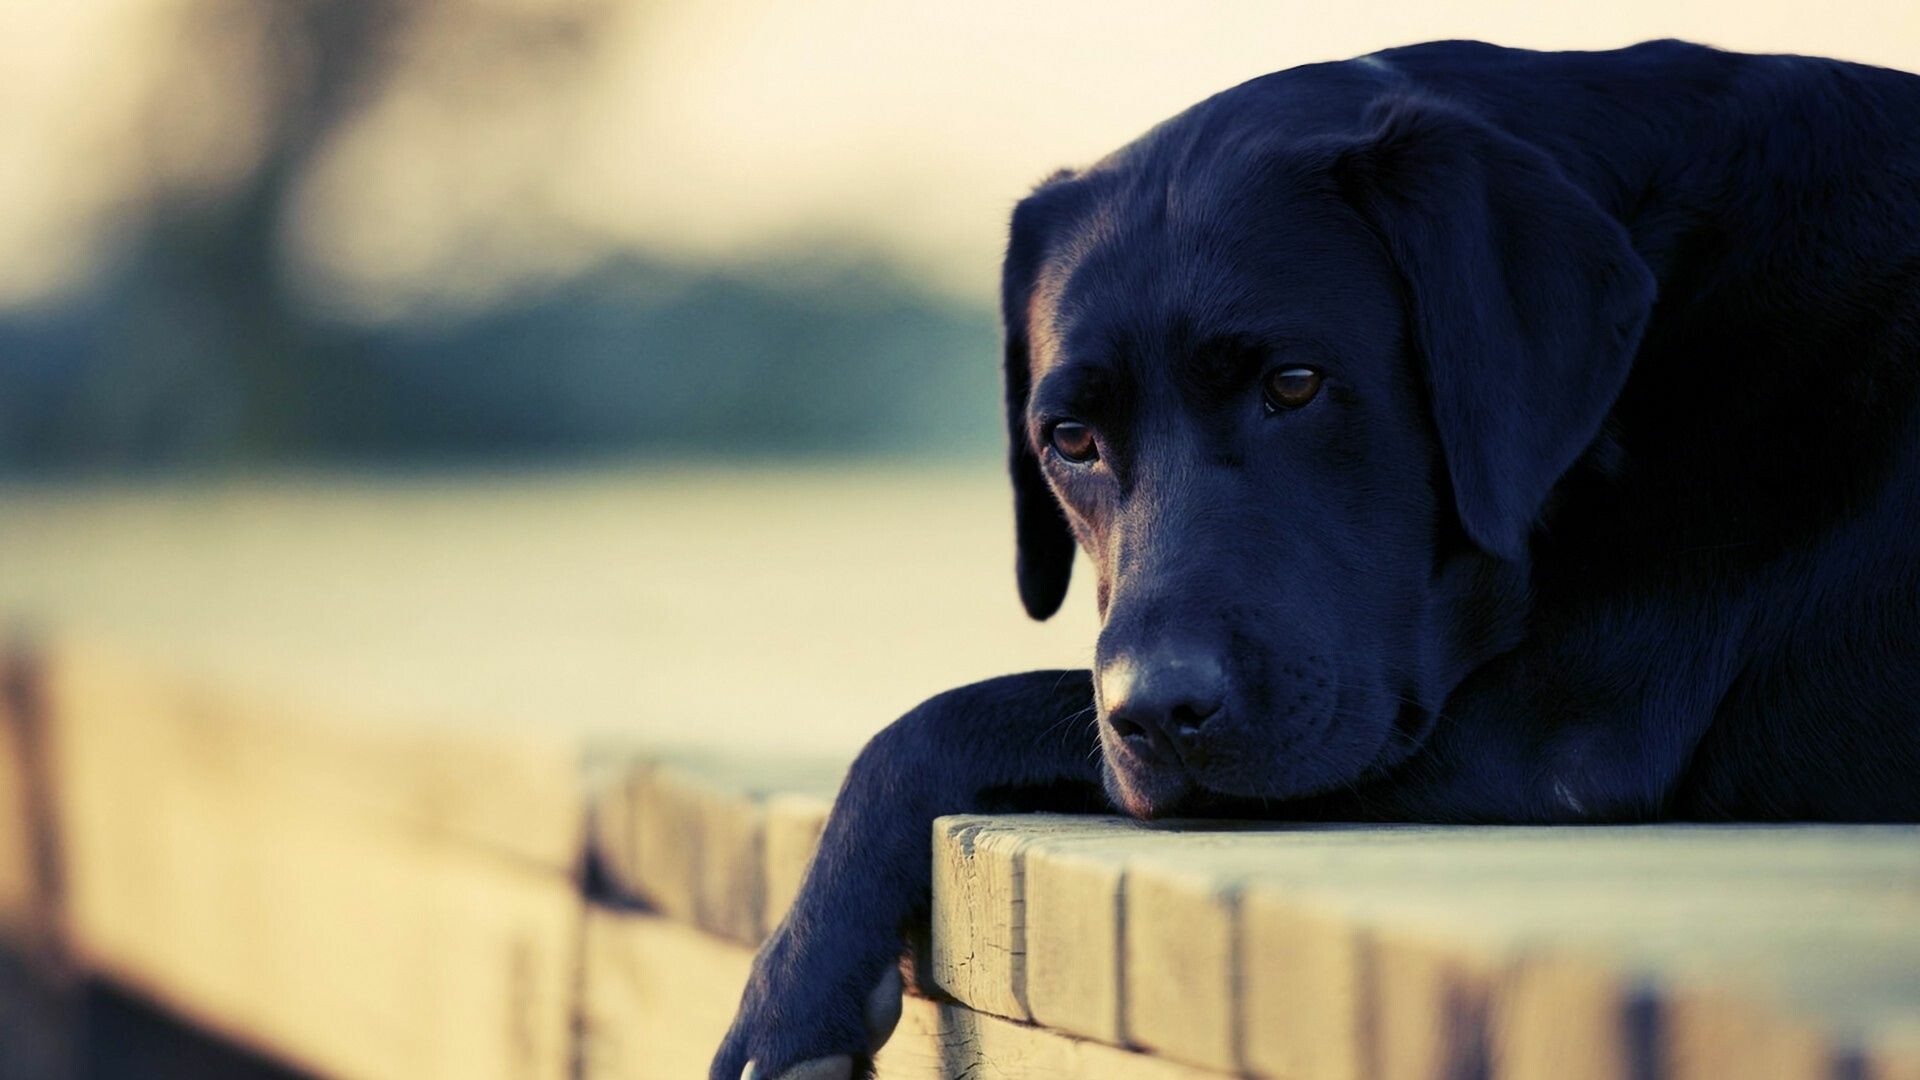 Labrador Retriever: The breed can be trained to detect cancer. 1920x1080 Full HD Background.